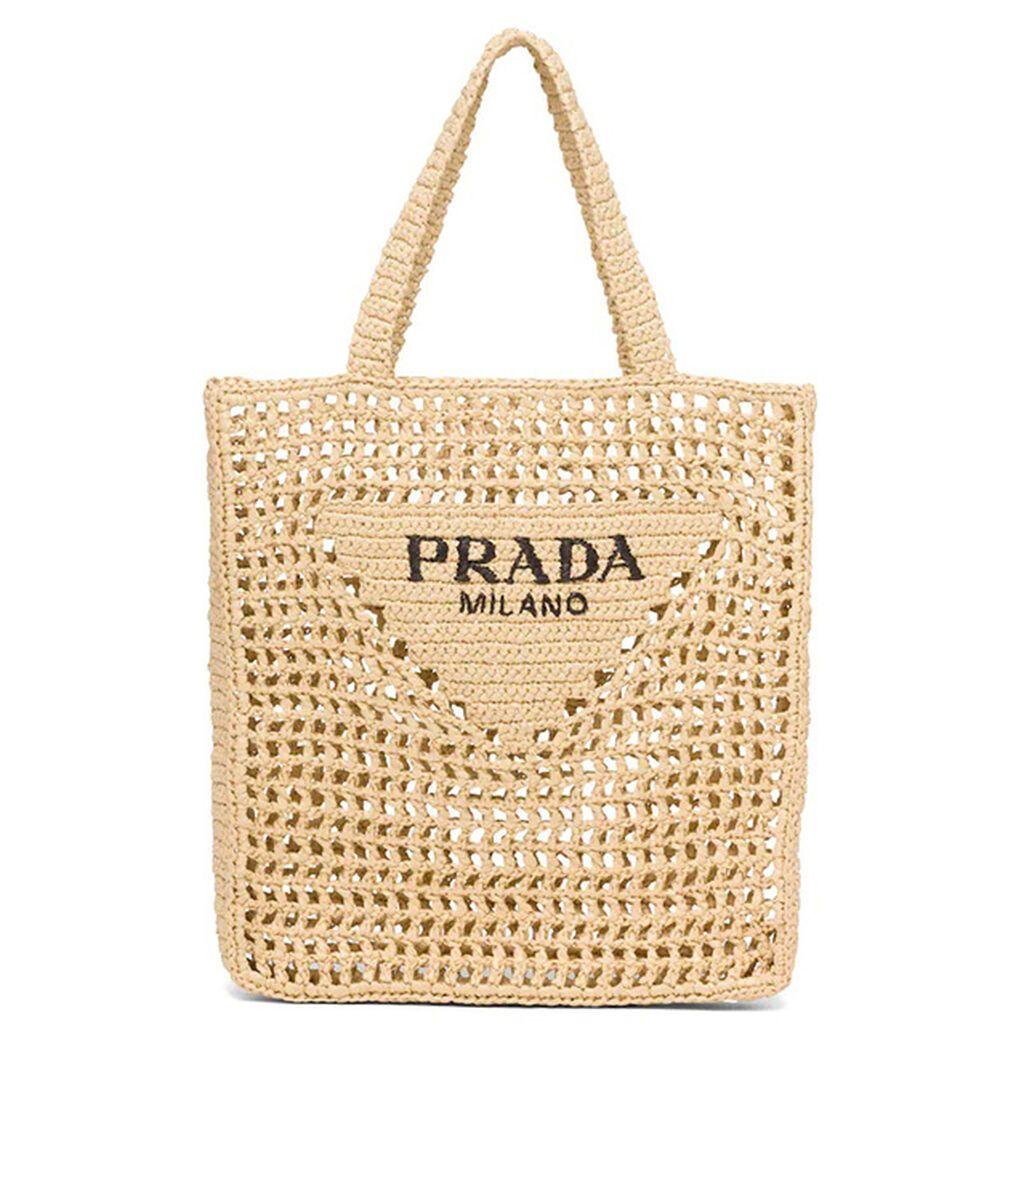 No need to go bankrupt: cheap versions of the raffia bag that all the influencers carry